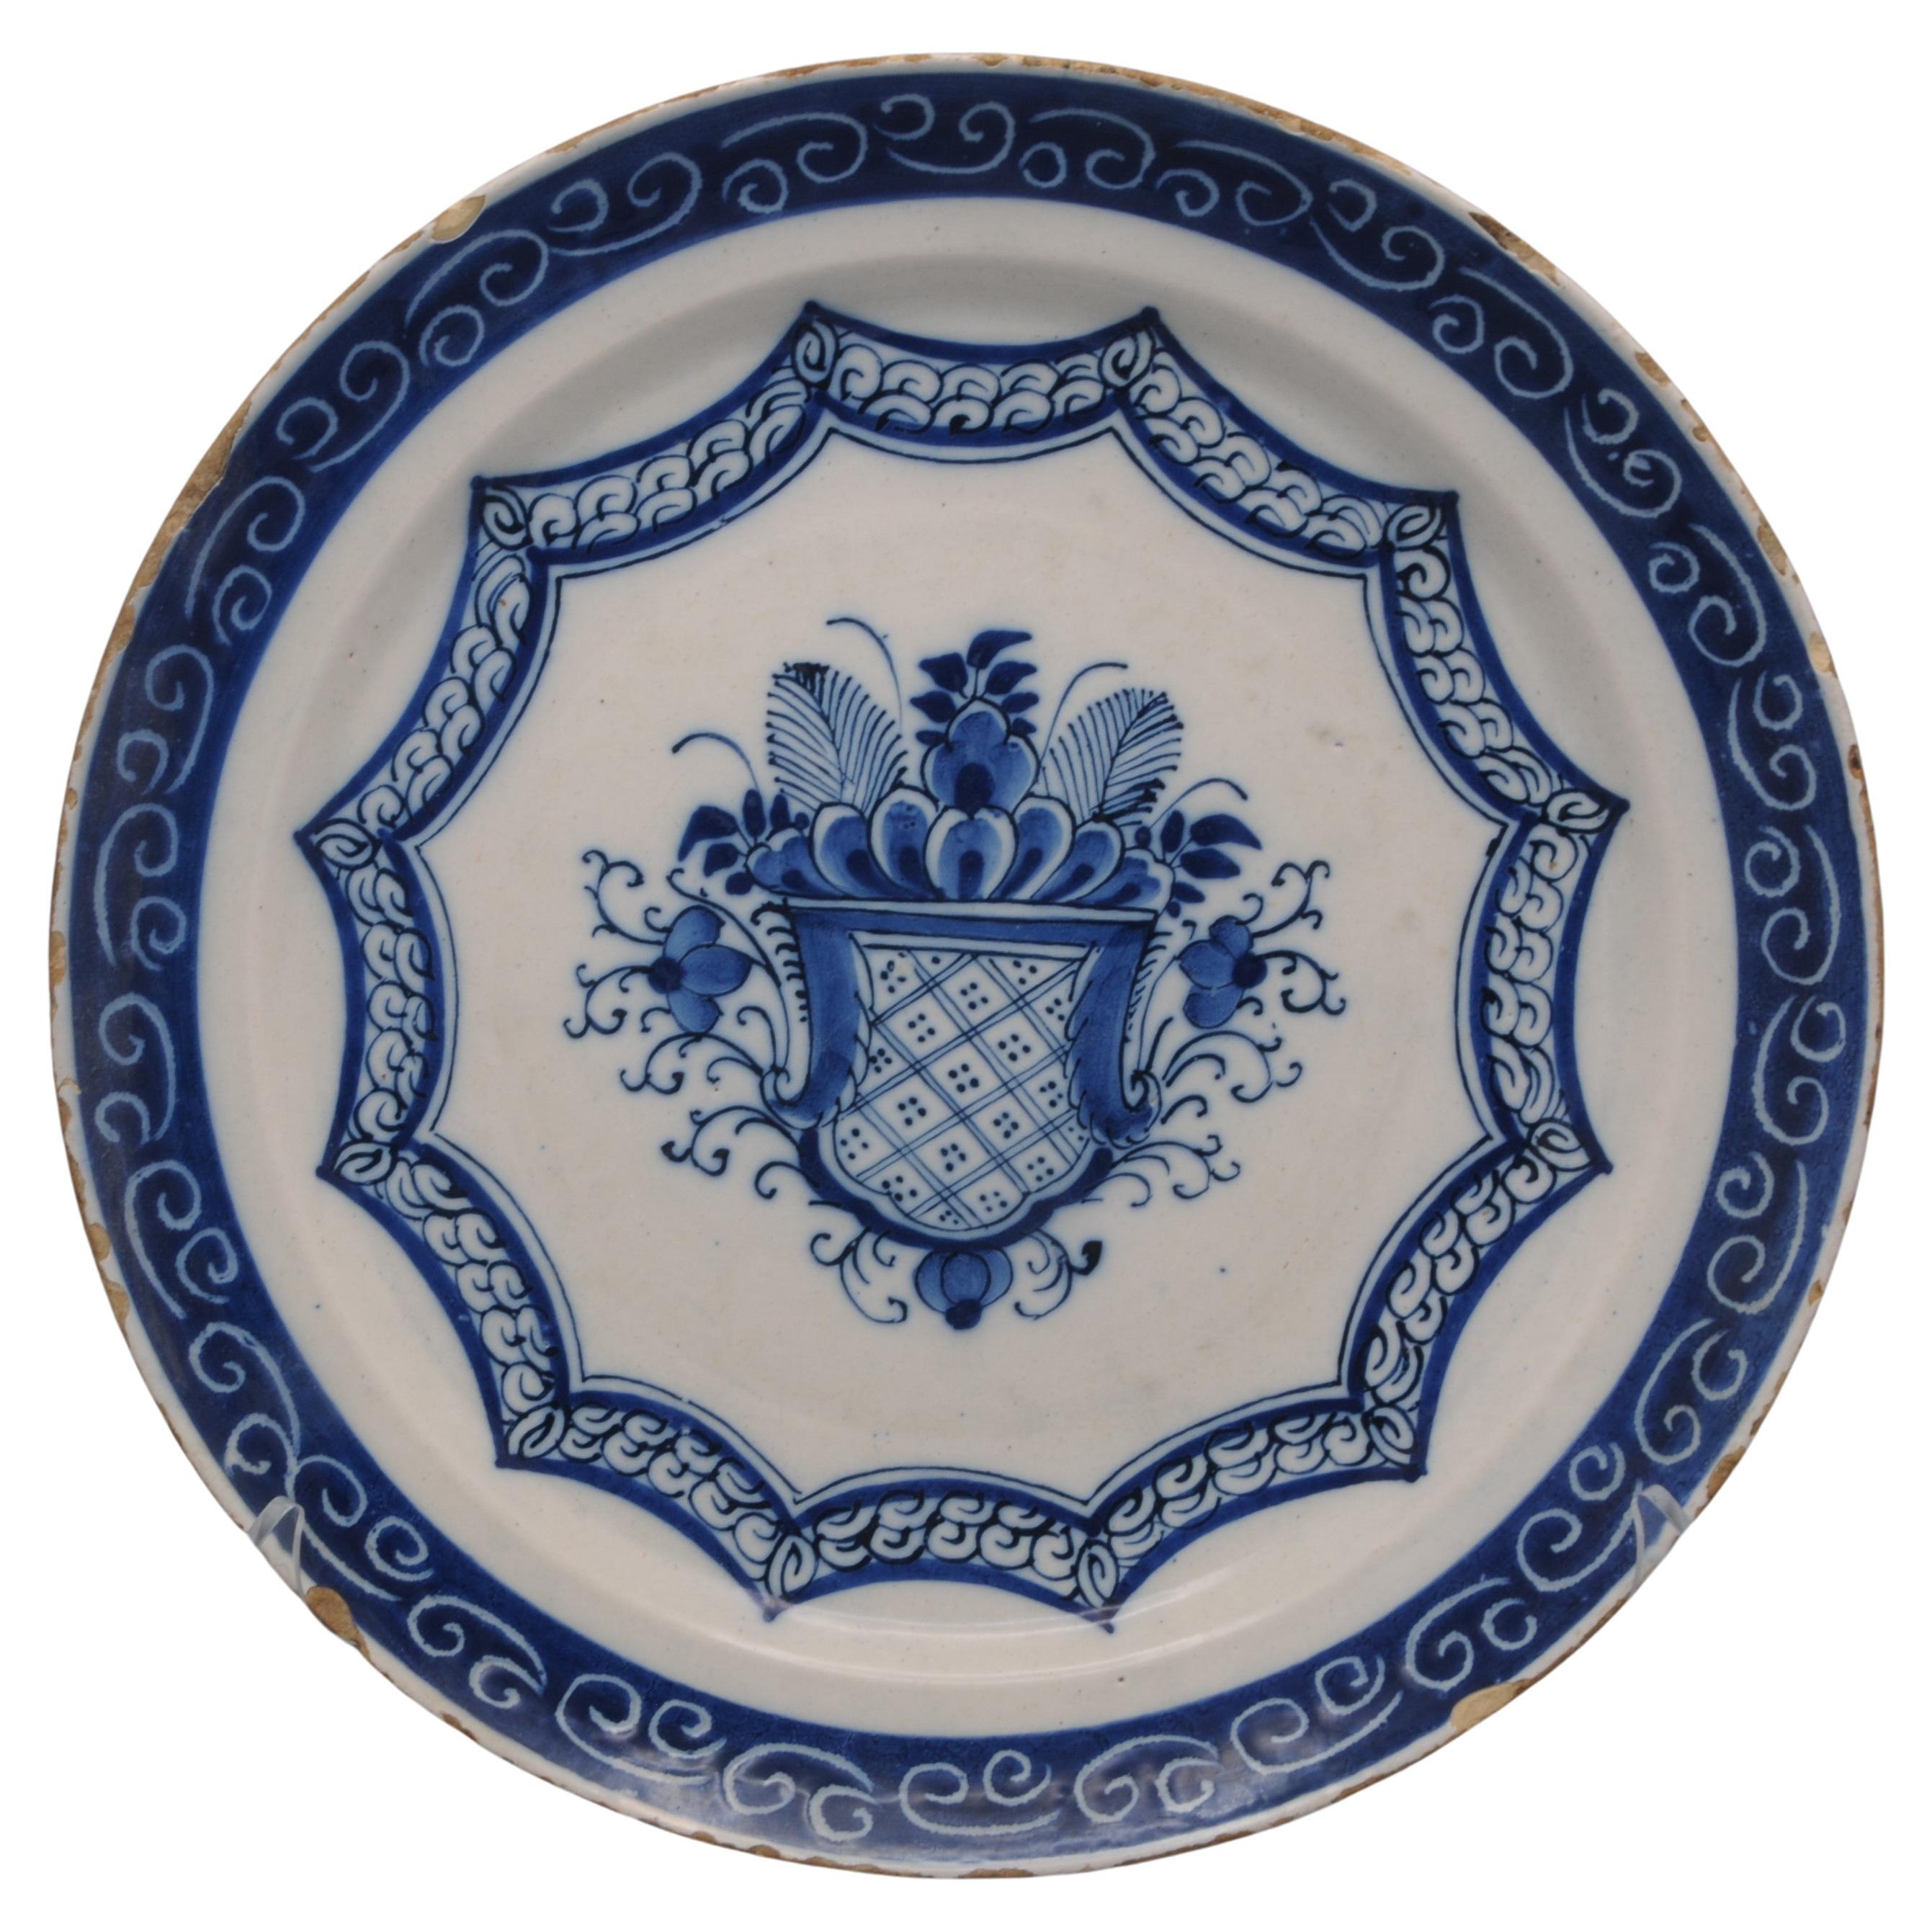 Delft - Chinoiserie dish with floral basket, second half 18th century